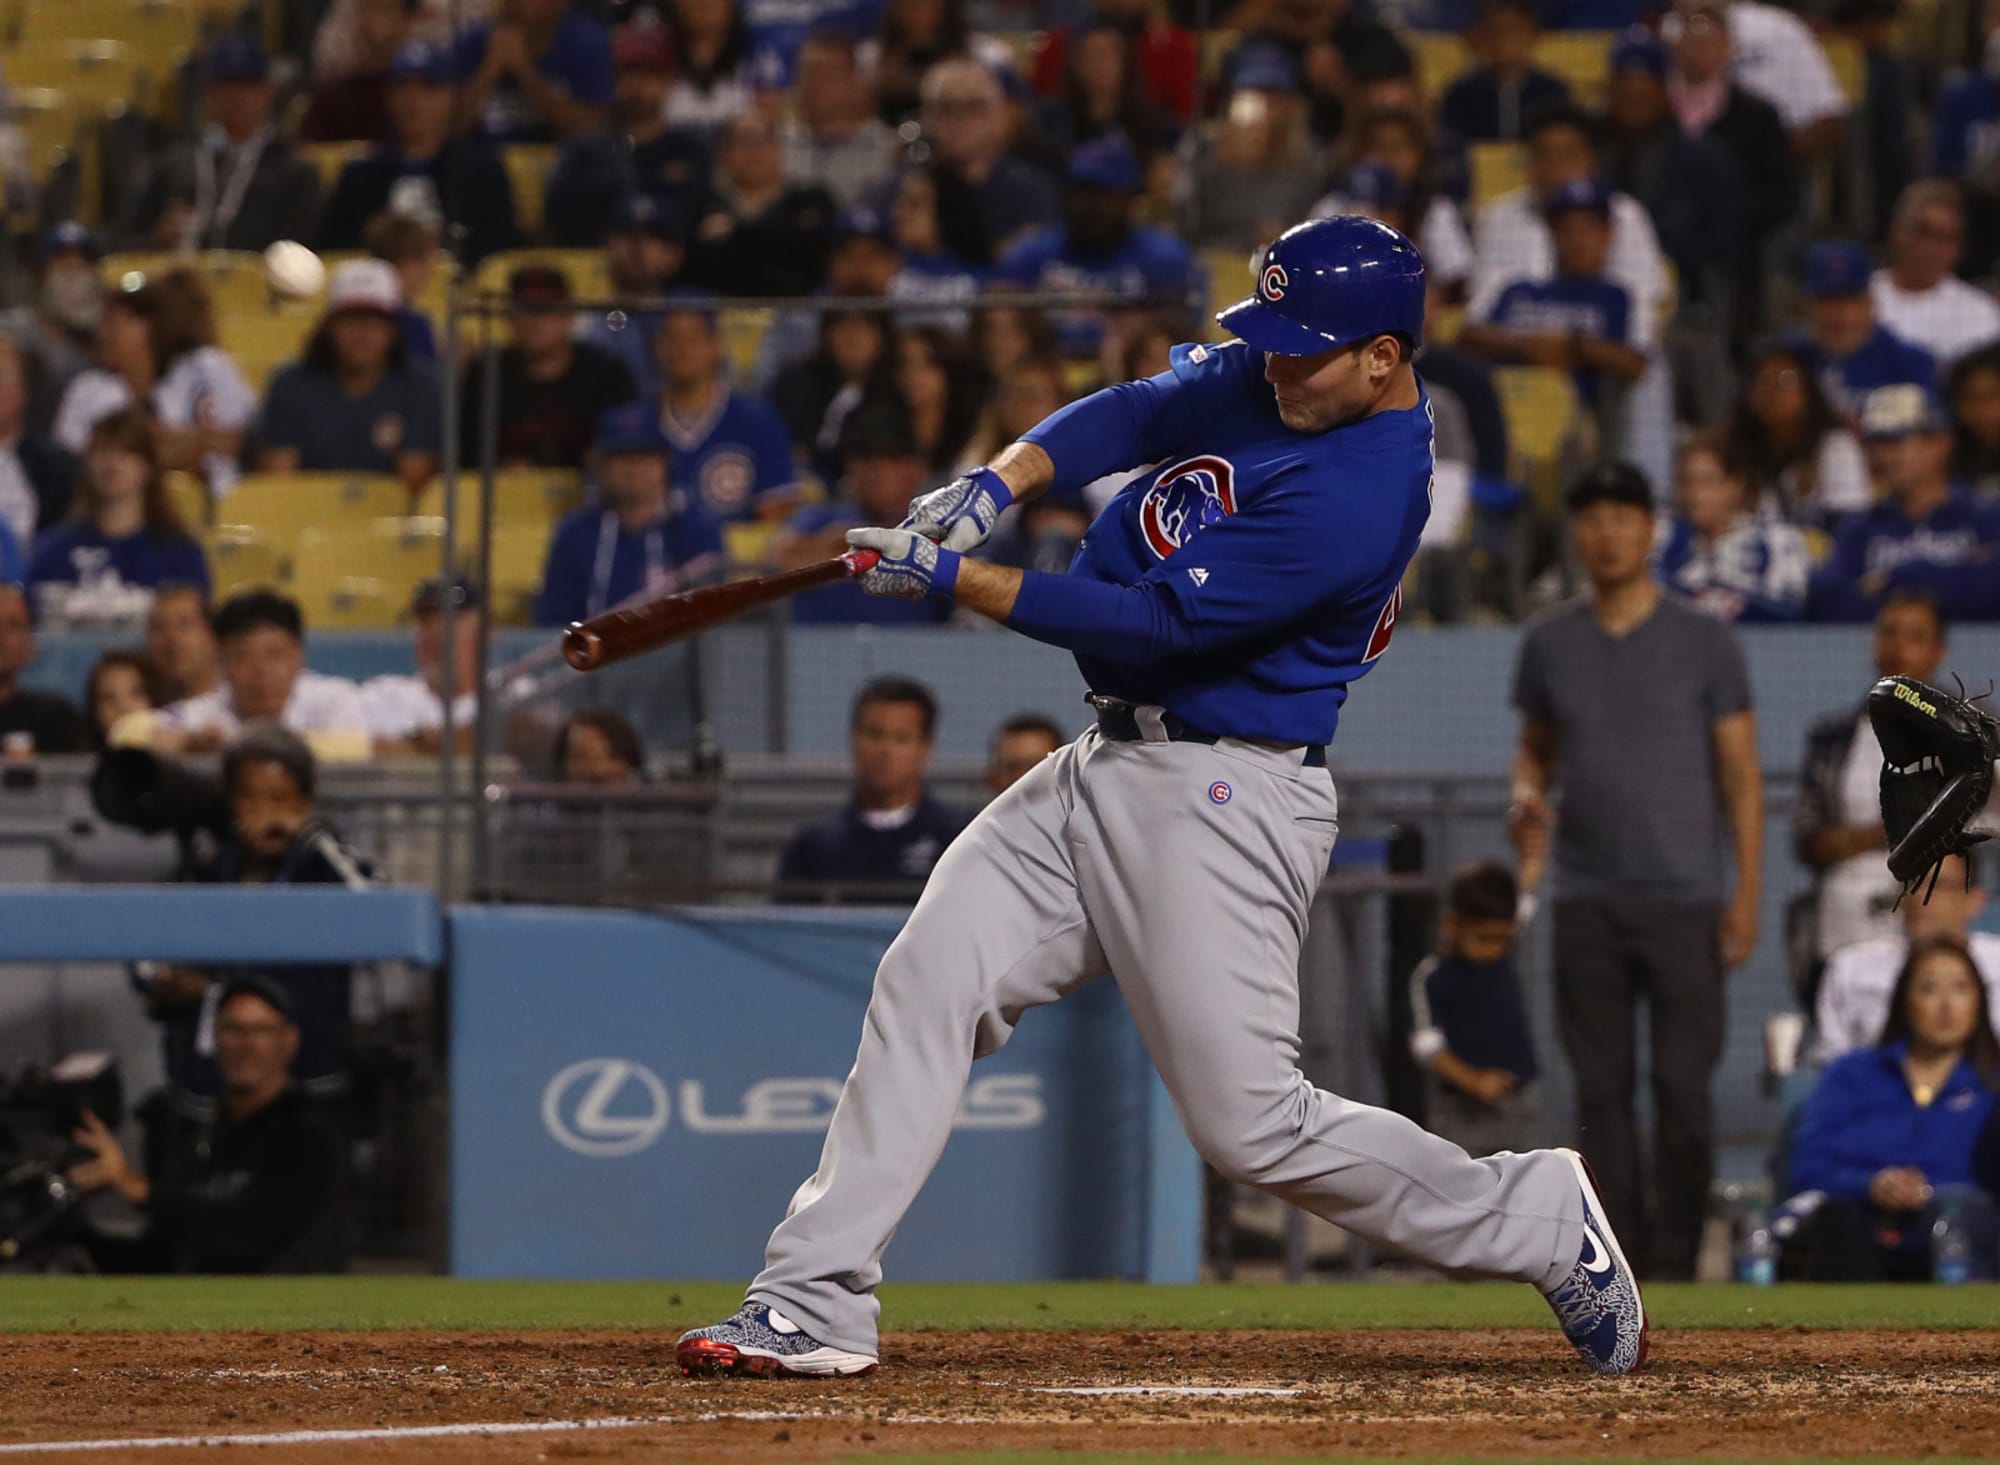 Chicago Cubs: Anthony Rizzo on pace for career year